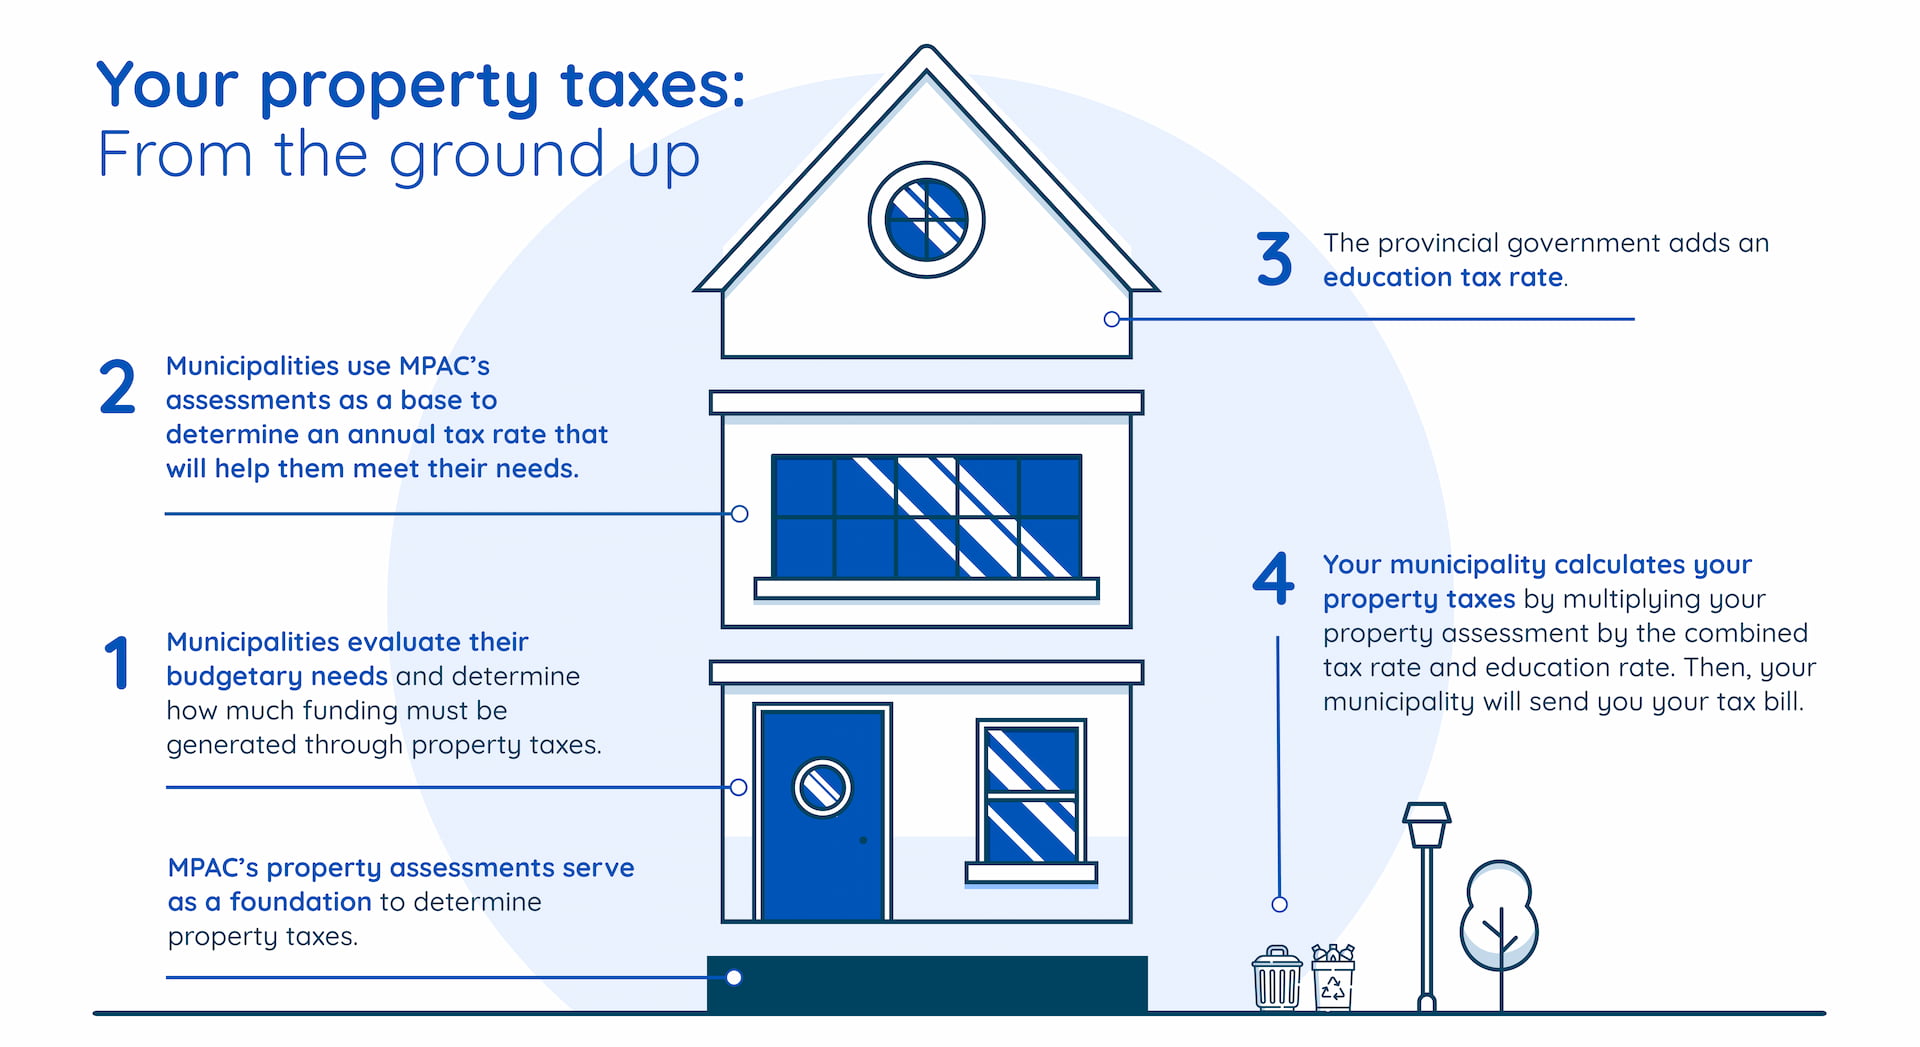 house graphic breaking down how property taxes are calculated Text: Your property taxes: From the ground up.  1. Muncipalities evaluate their budgetary needs and determine how much funding must be generated through property taxes. MPAC’s property assessments serve as a foundation to determine property taxes. 2. Municipalities use MPAC’s assessments as a base to determine an annual tax rate that will help them meet their needs. 3. The provincial government adds an aducation tax rate. 4. Your municipality calculates your property taxes by multiplying your property assessment by the combined tax rate and education rate. Then, your municipality will send you your tax bill.